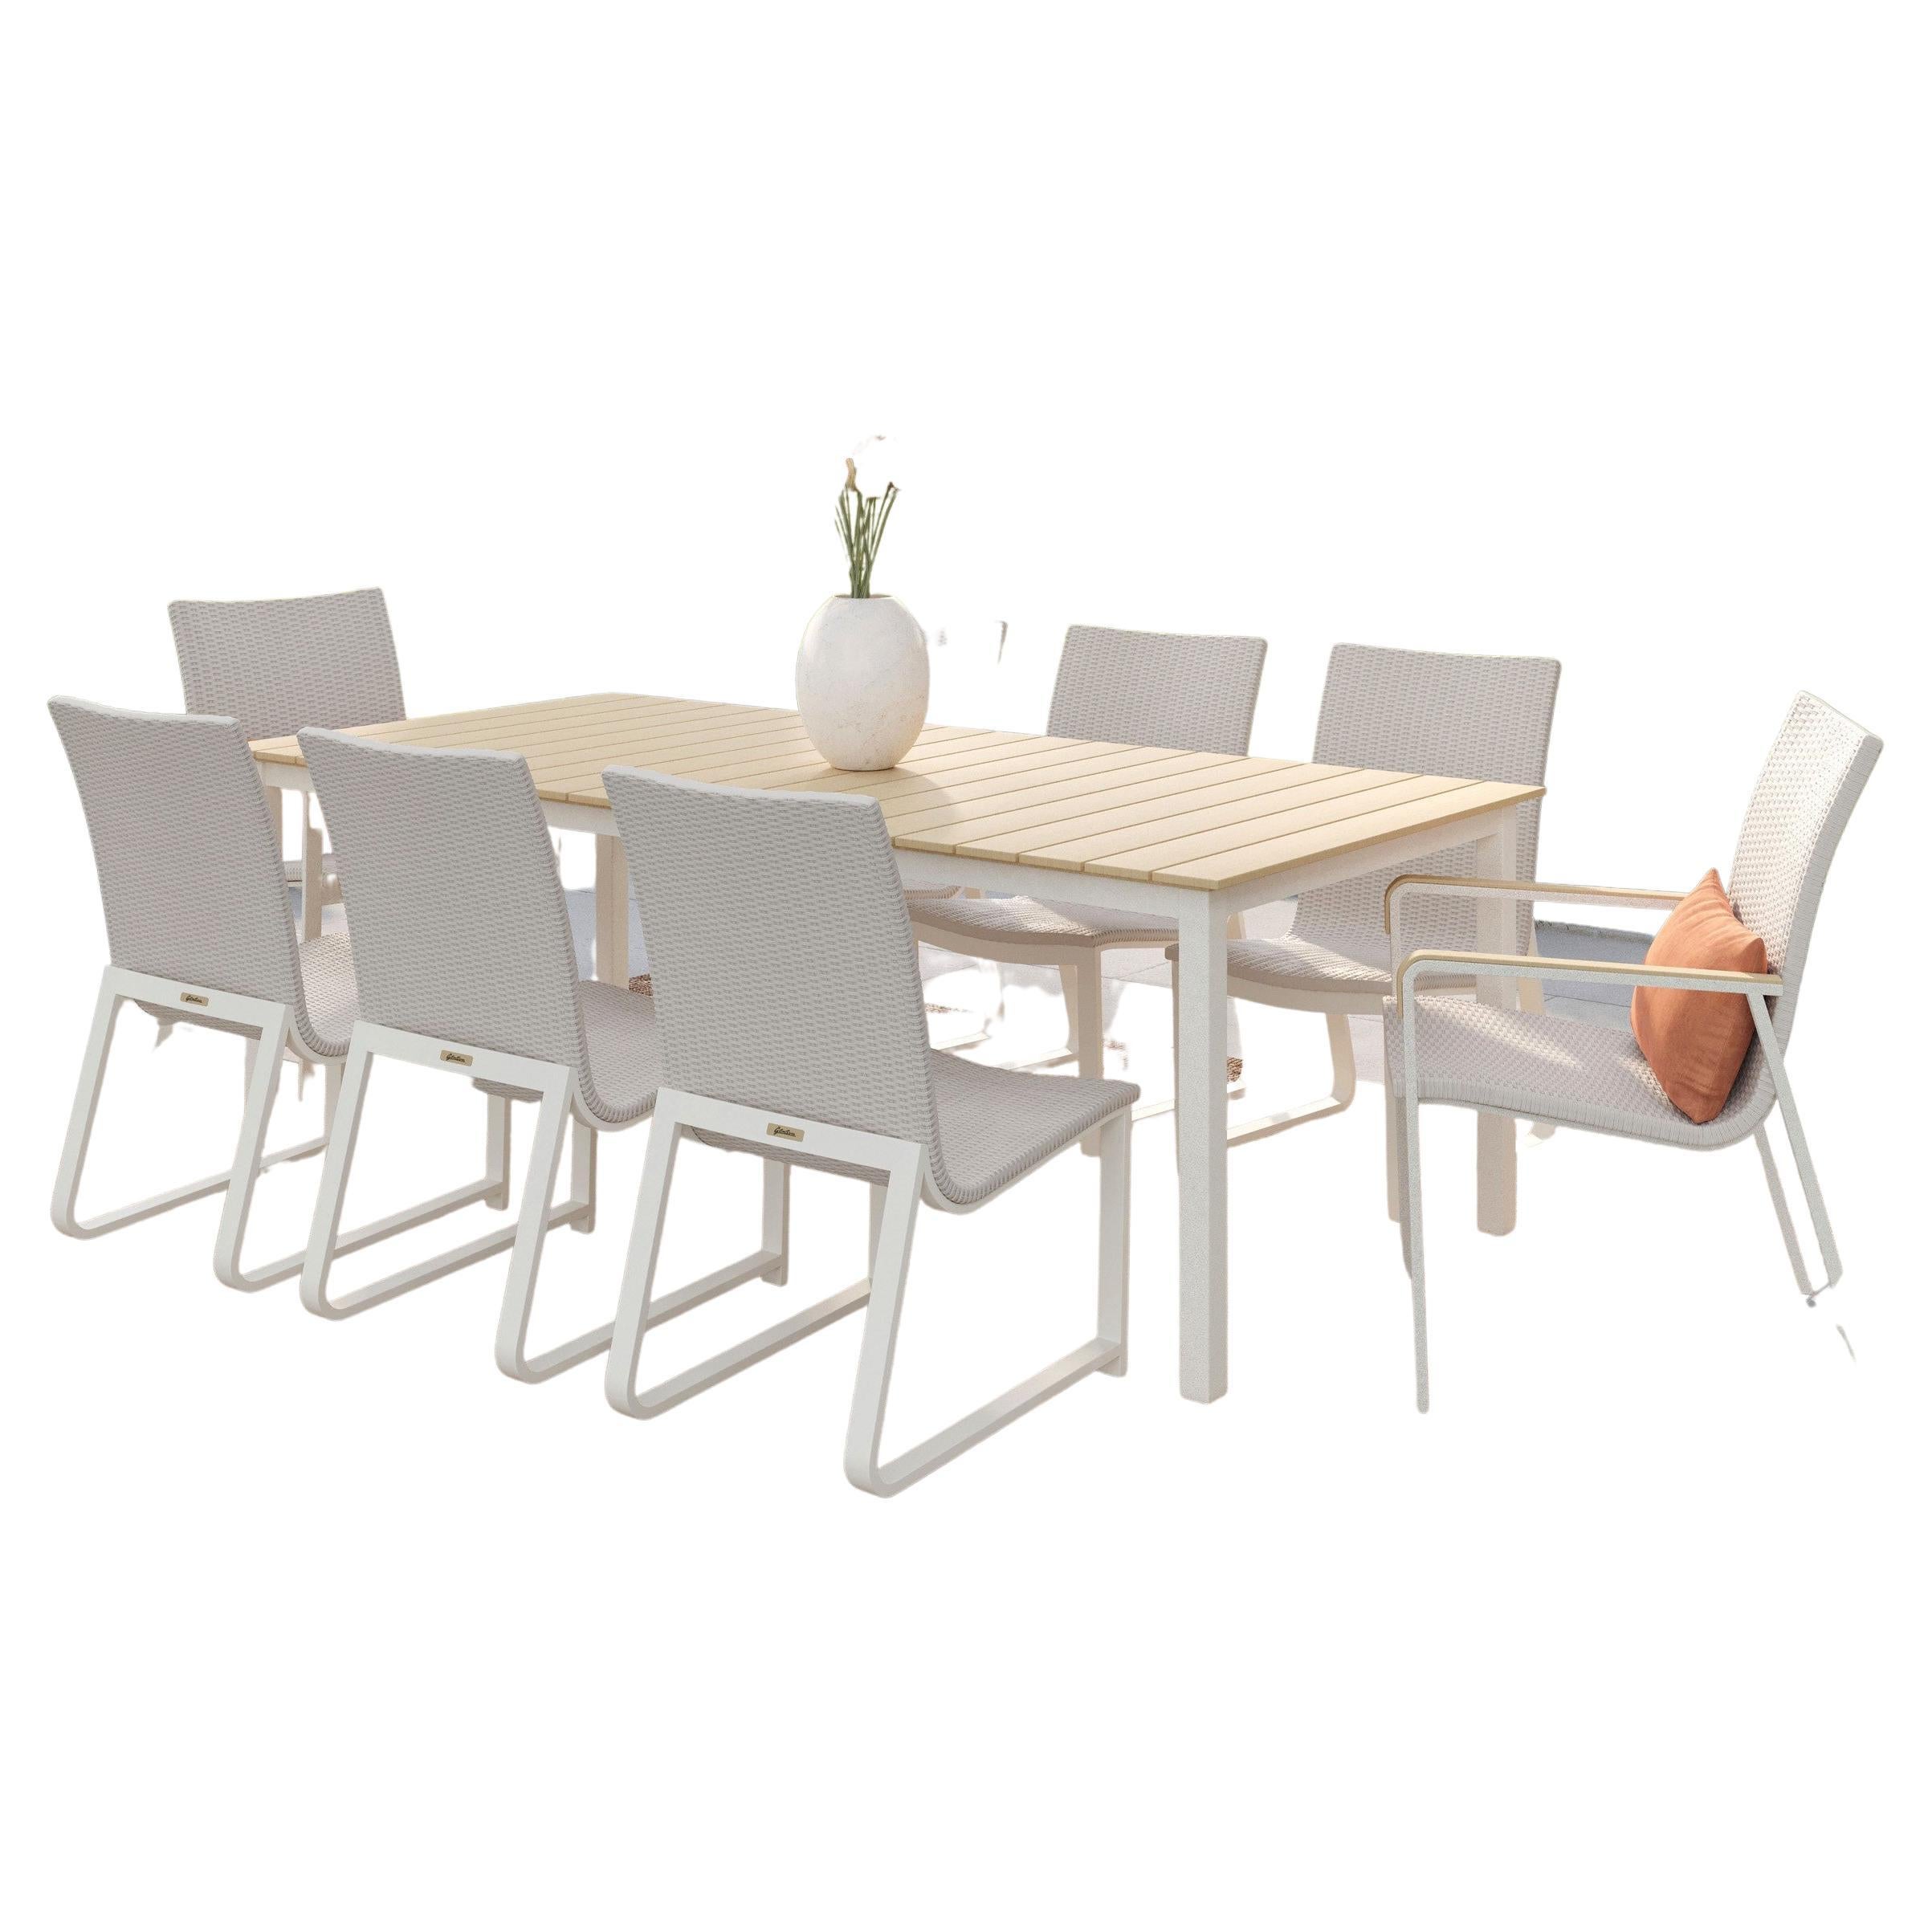 New Gensun Casual Ventura 9 Piece Cast Aluminum and Weave Table and Chairs Set   For Sale